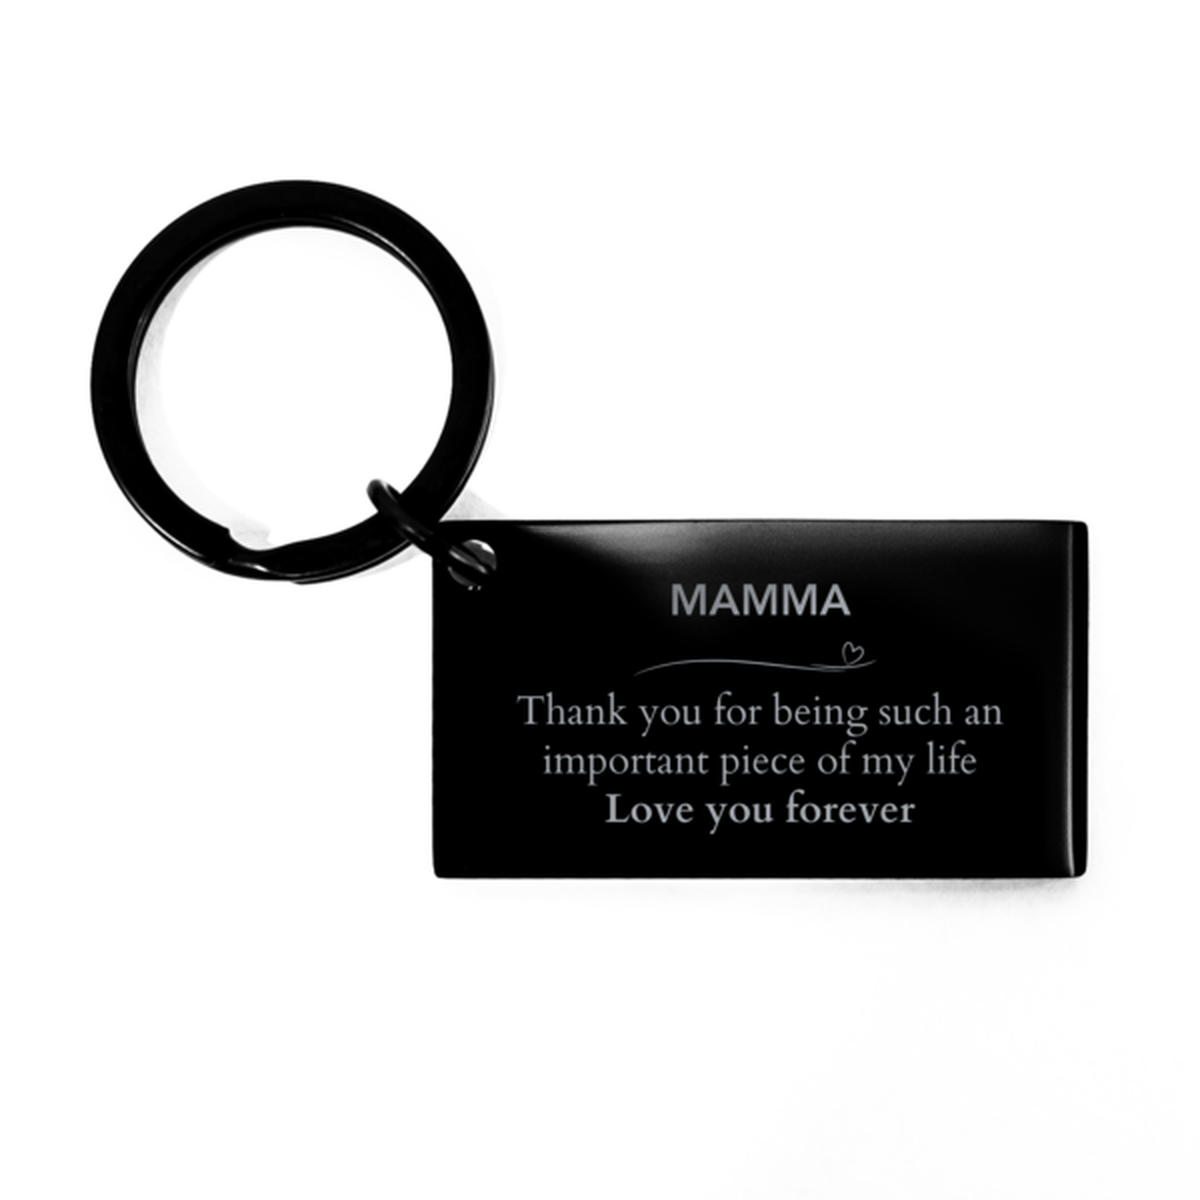 Appropriate Mamma Keychain Epic Birthday Gifts for Mamma Thank you for being such an important piece of my life Mamma Christmas Mothers Fathers Day